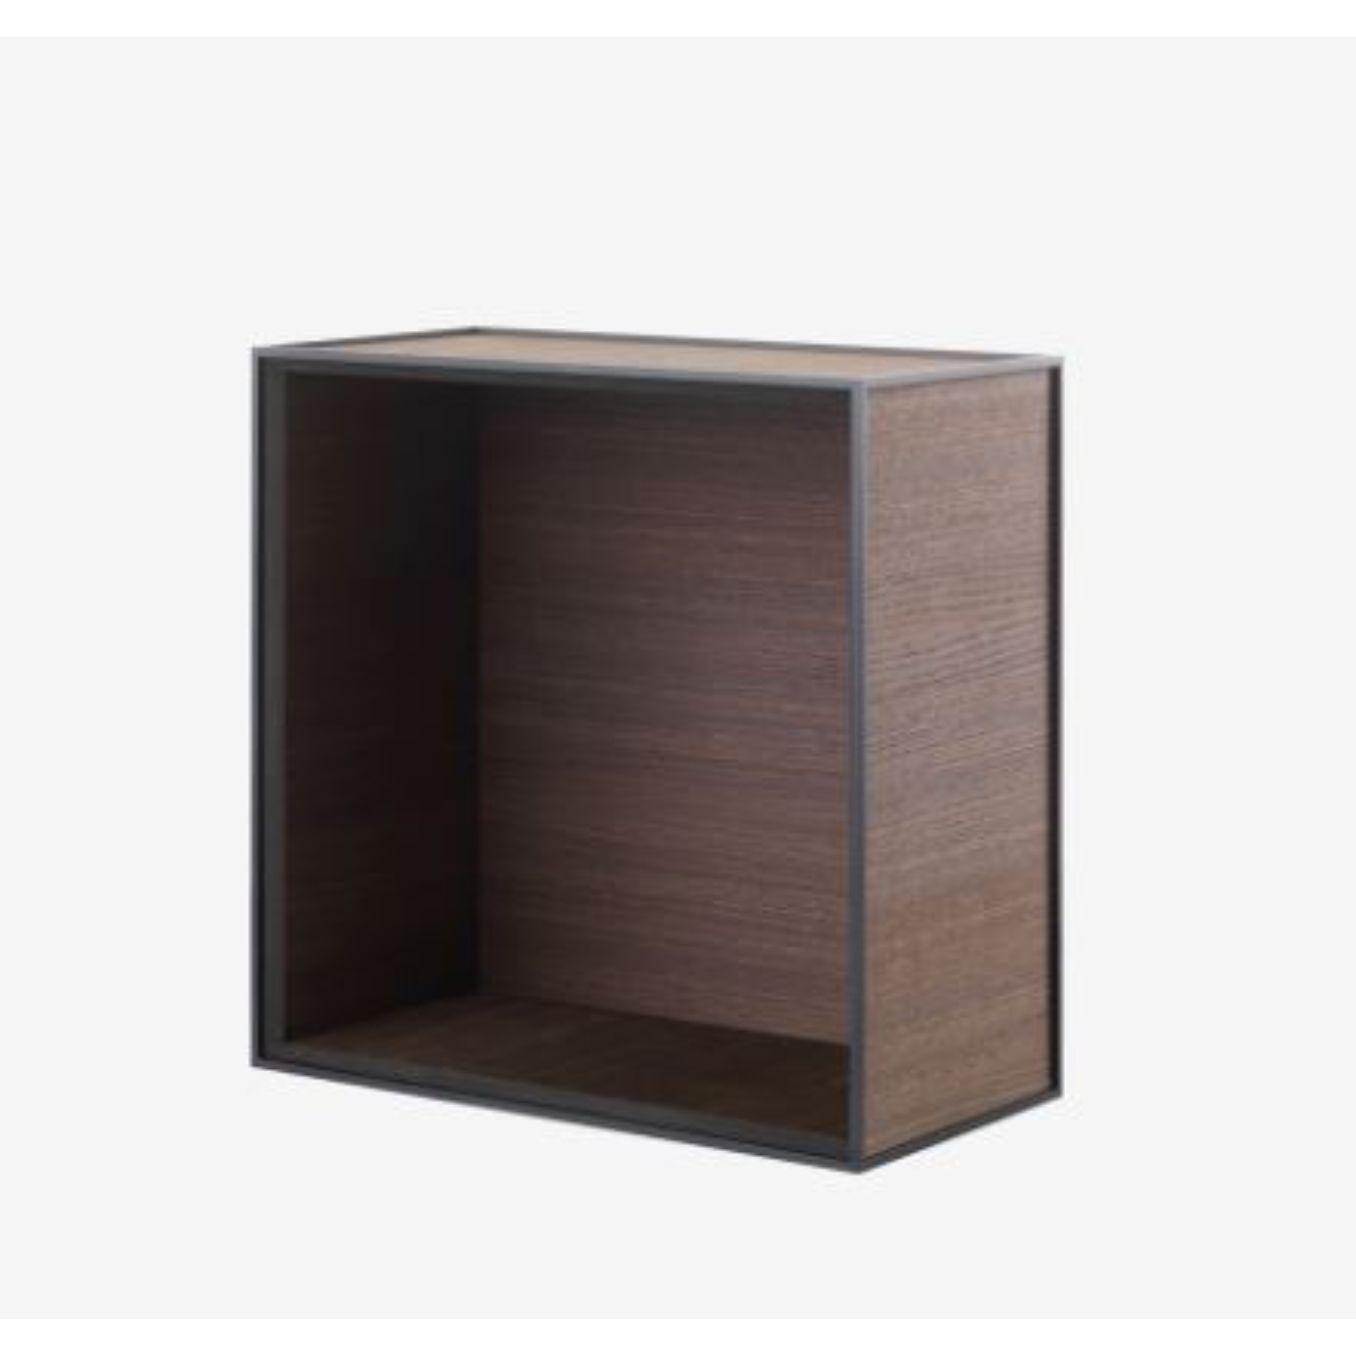 42 Smoked oak frame box by Lassen
Dimensions: D 42 x W 21 x H 42 cm 
Materials: Finér, Melamin, Melamin, Melamine, metal, veneer, oak
Also available in different colours and dimensions.
Weight: 10.5 Kg


By Lassen is a Danish design brand